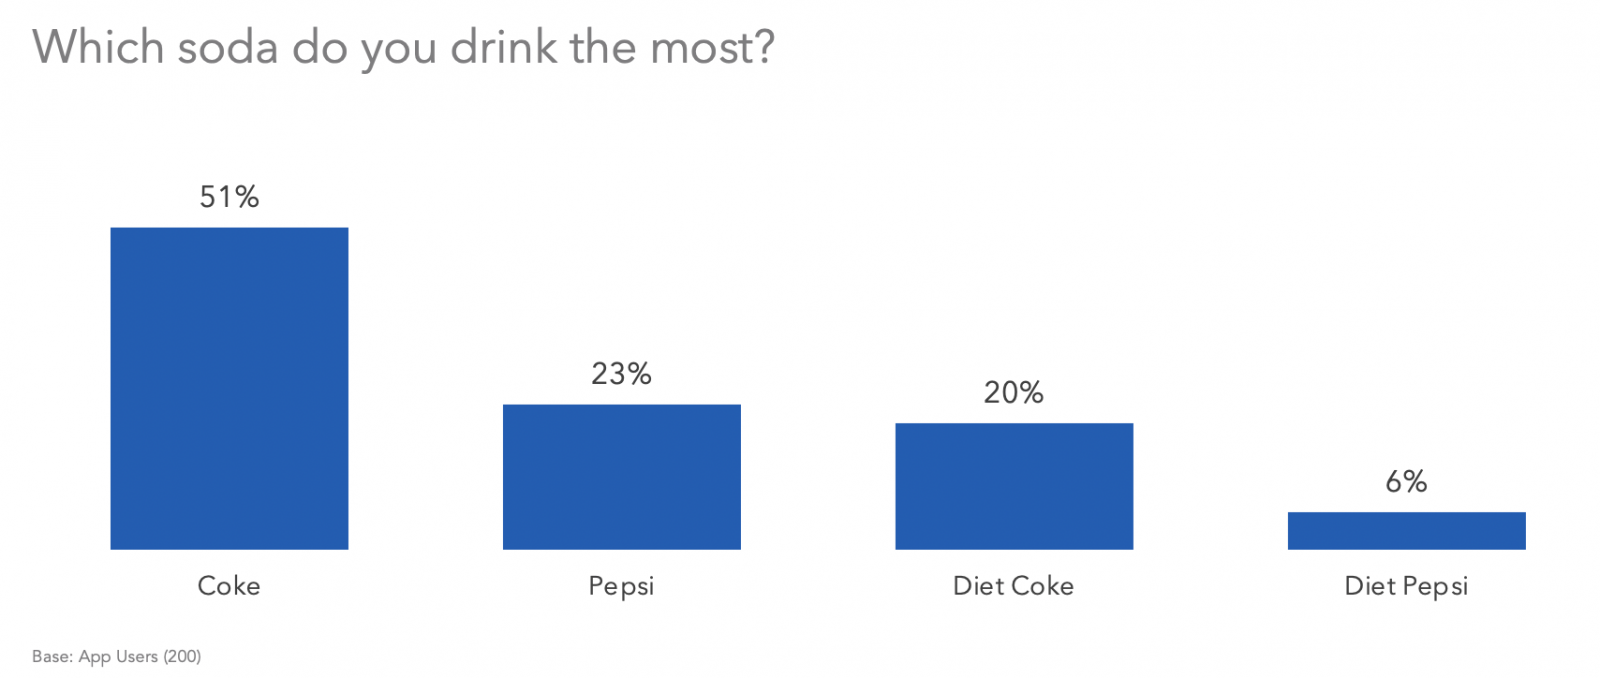 Which soda do you drink the most?